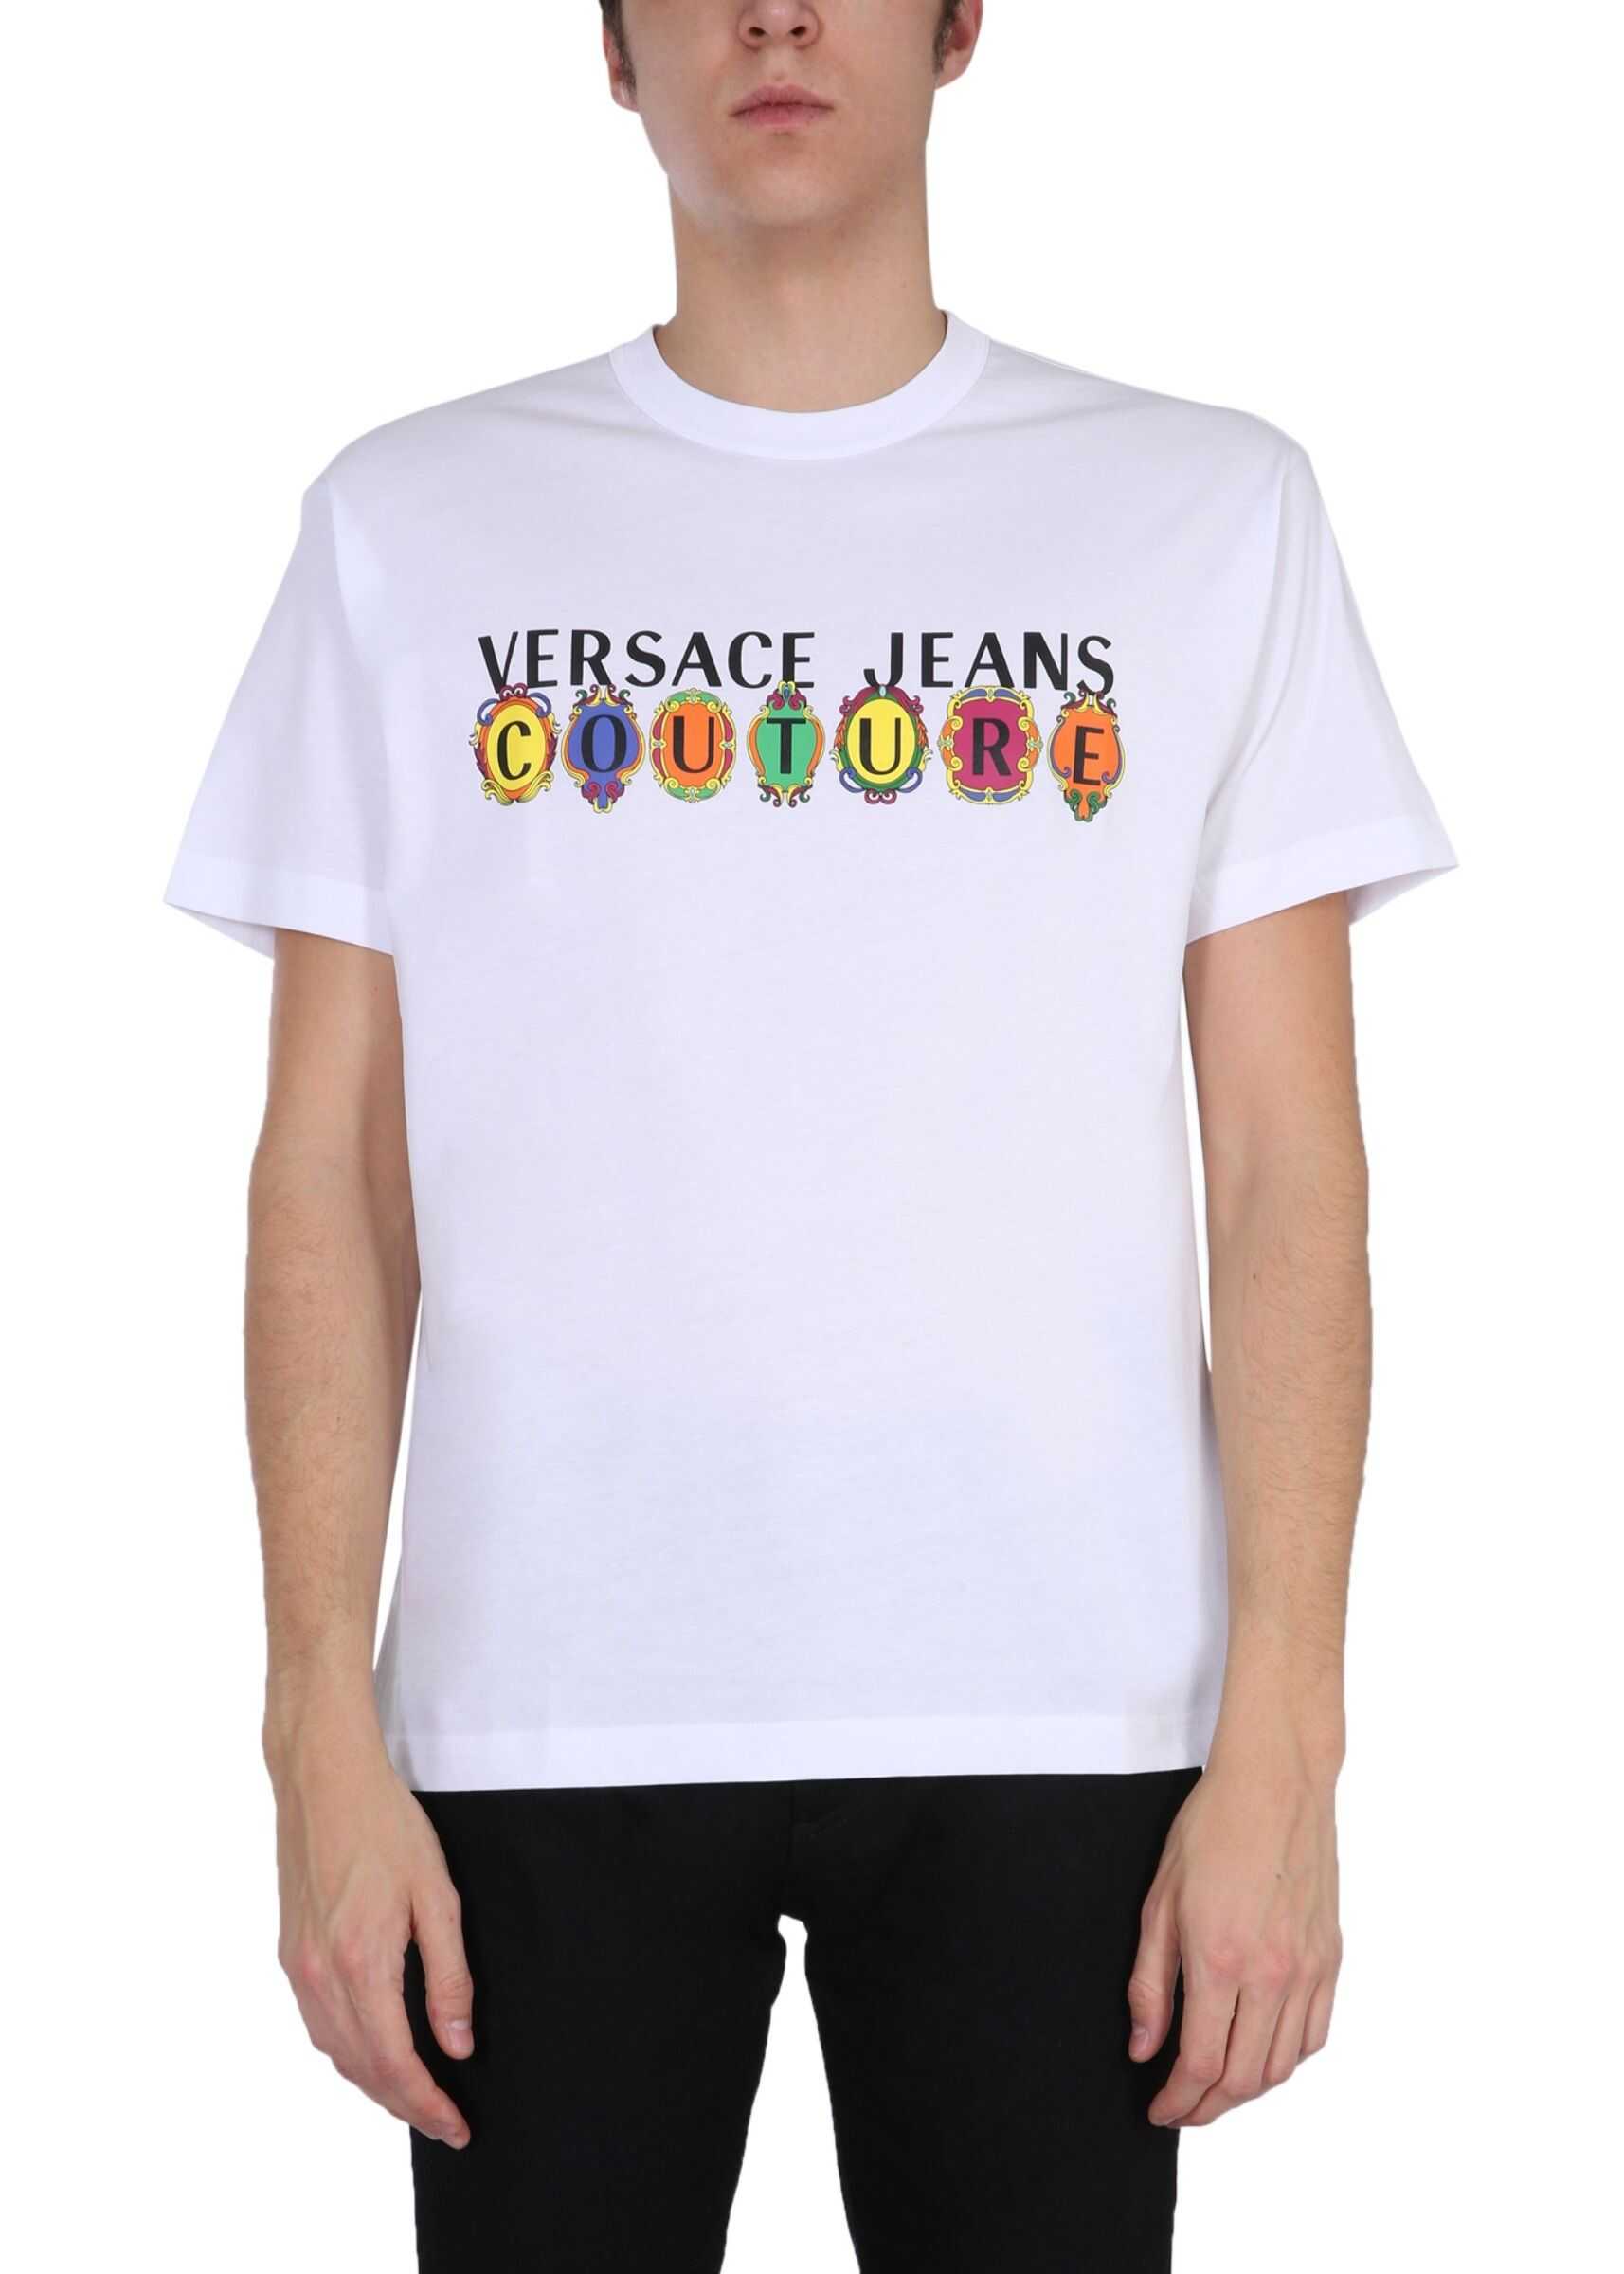 Versace Jeans Couture Crew Neck T-Shirt B3GWA7PA_30457003 WHITE